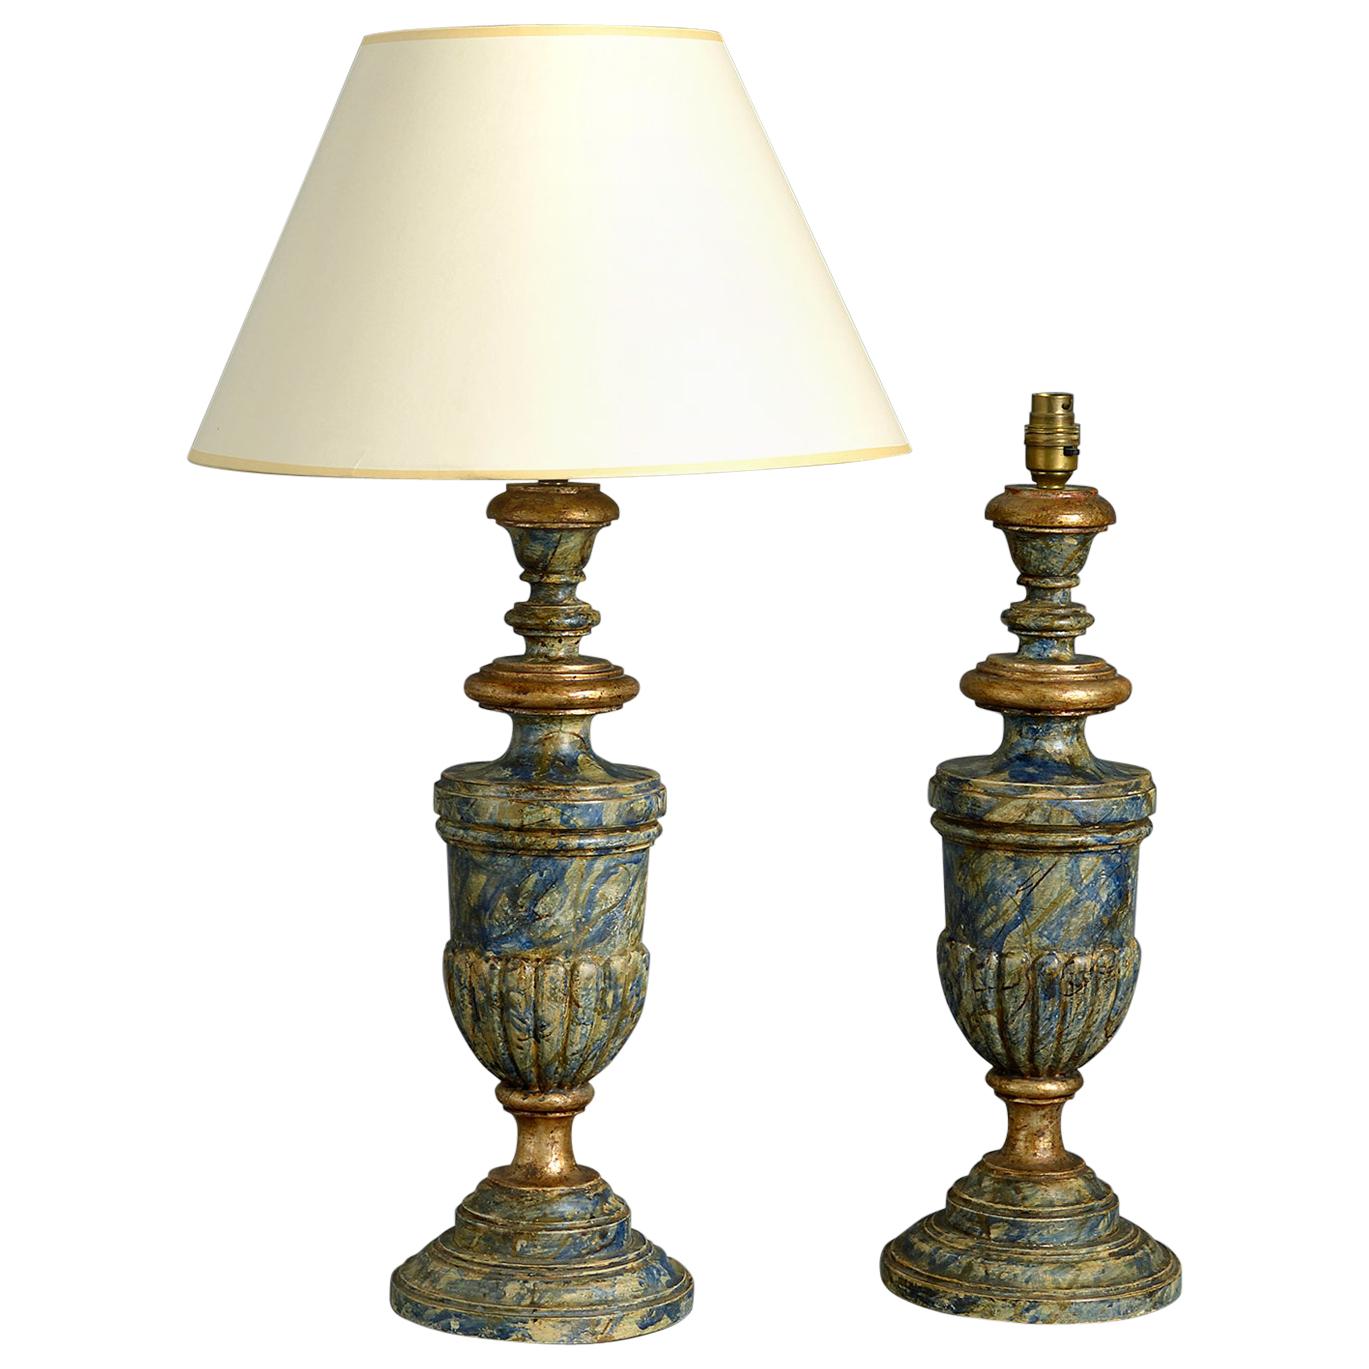 Early 20th Century Pair of Faux Marble Lamps